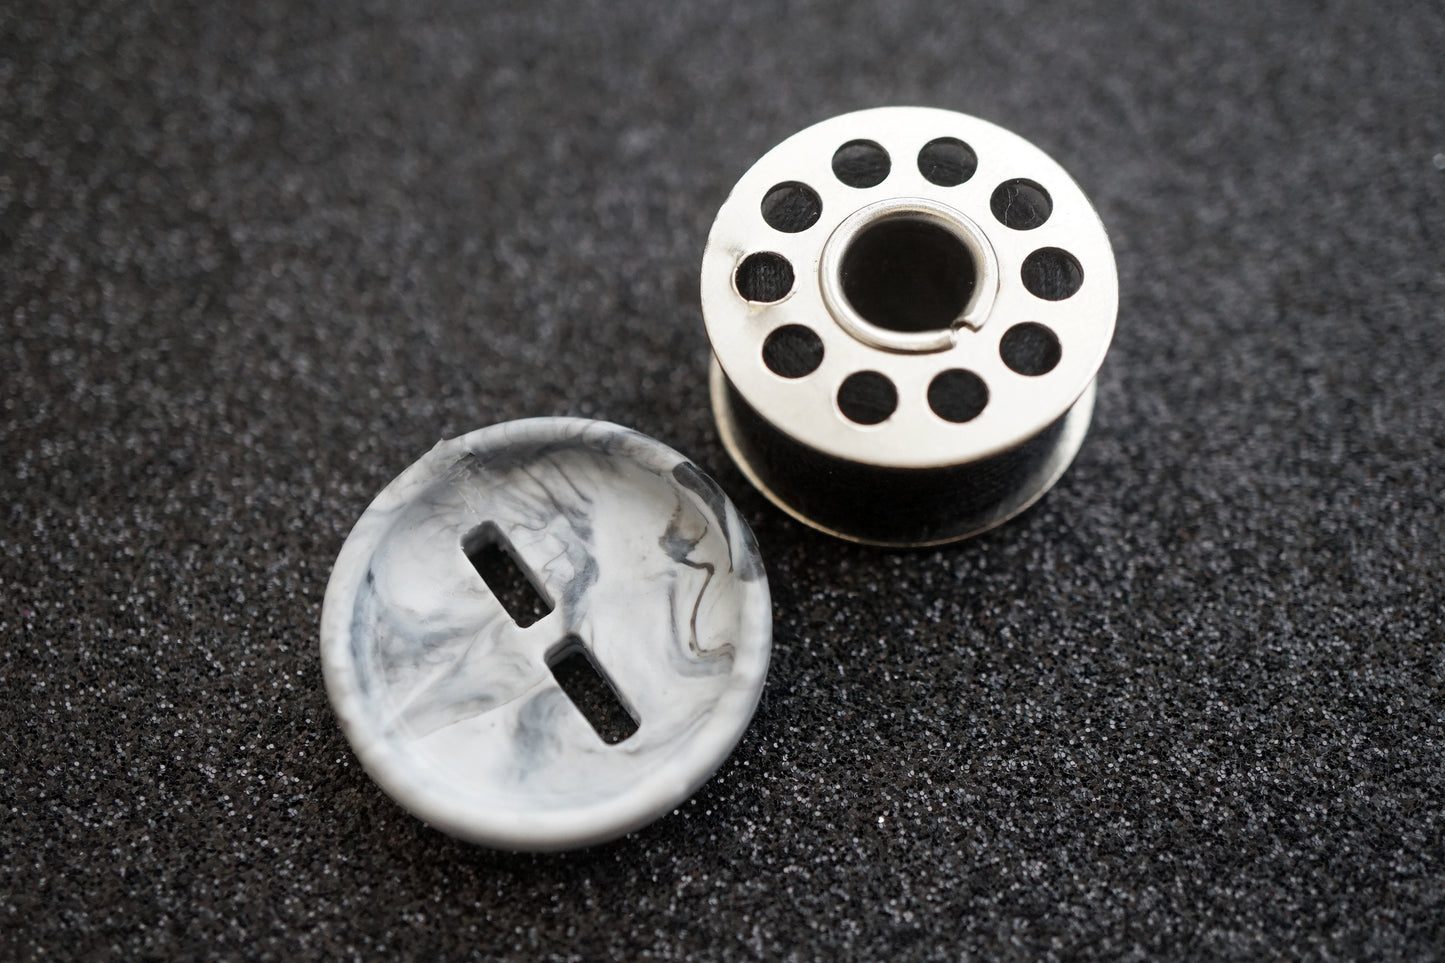 The Marble Button